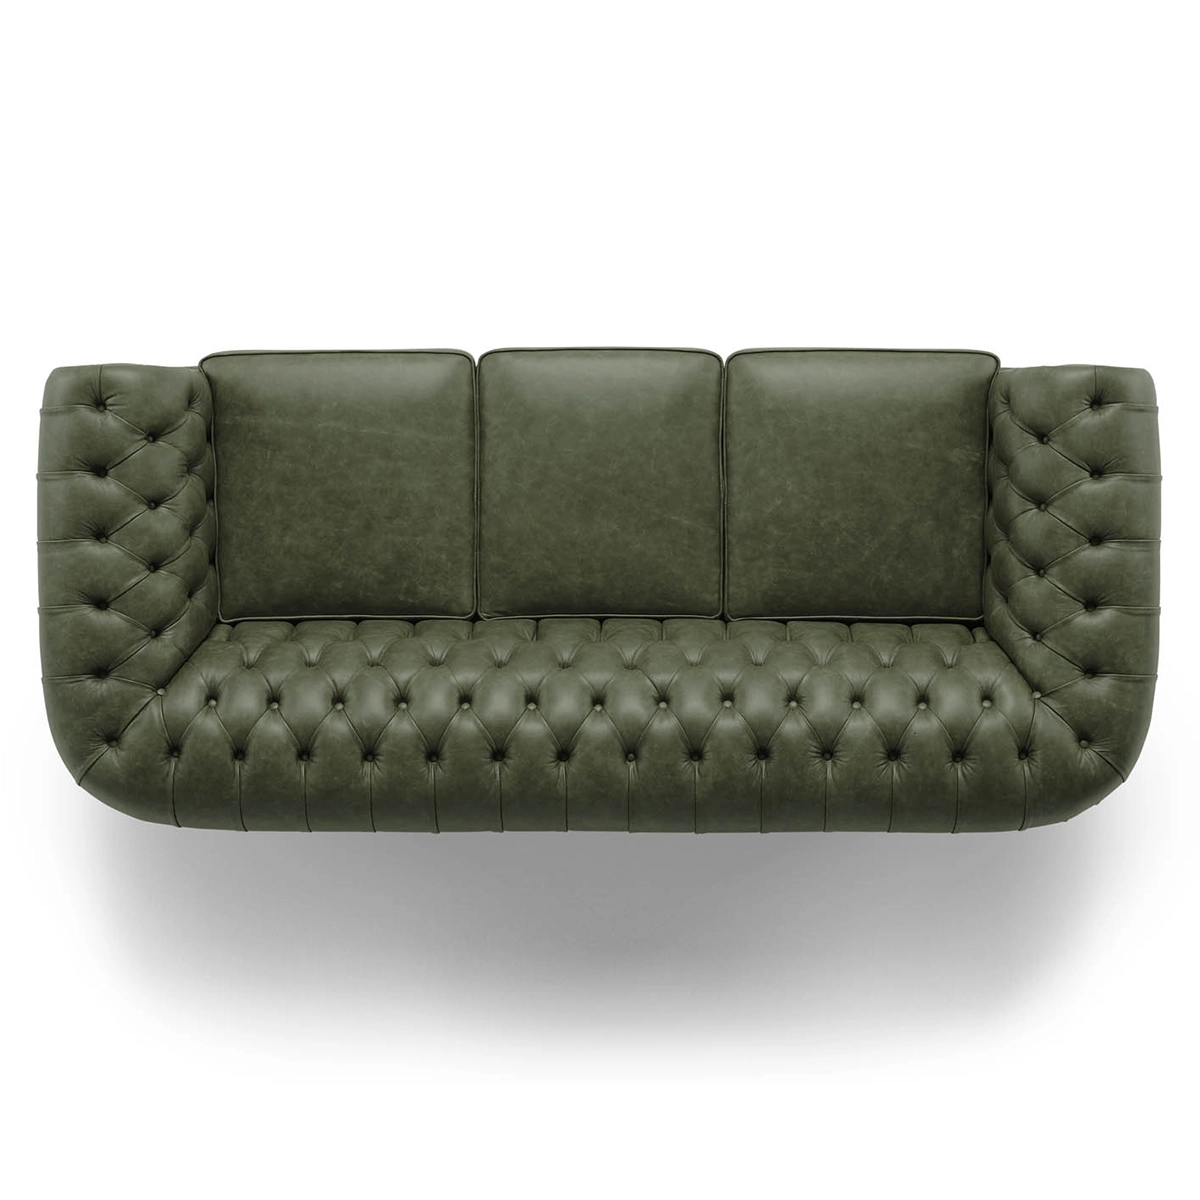 Three-seater leather Chesterfield sofa